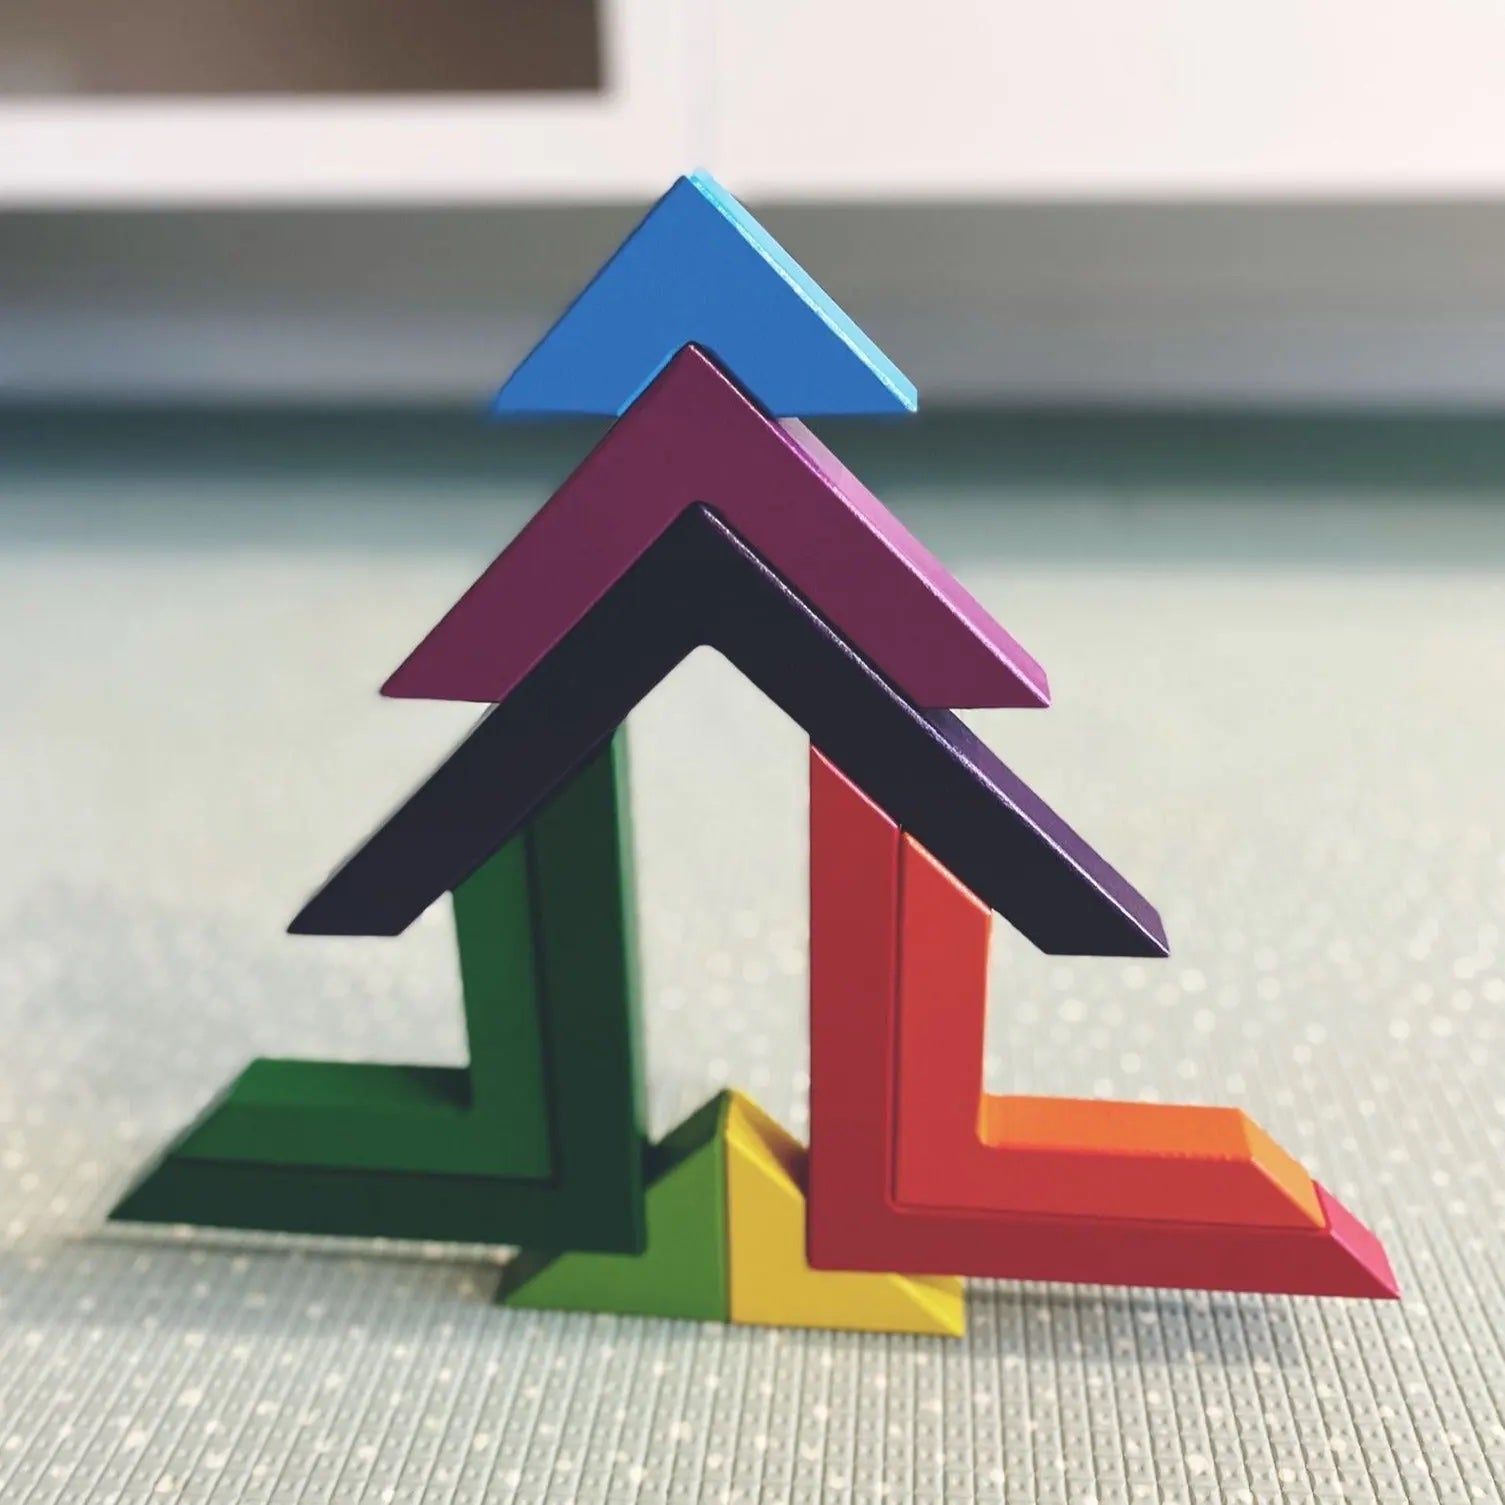 Rainbow Triangle Builder Set from Four Little Monkeys, a colourful and educational toy encouraging creativity and skill development in children